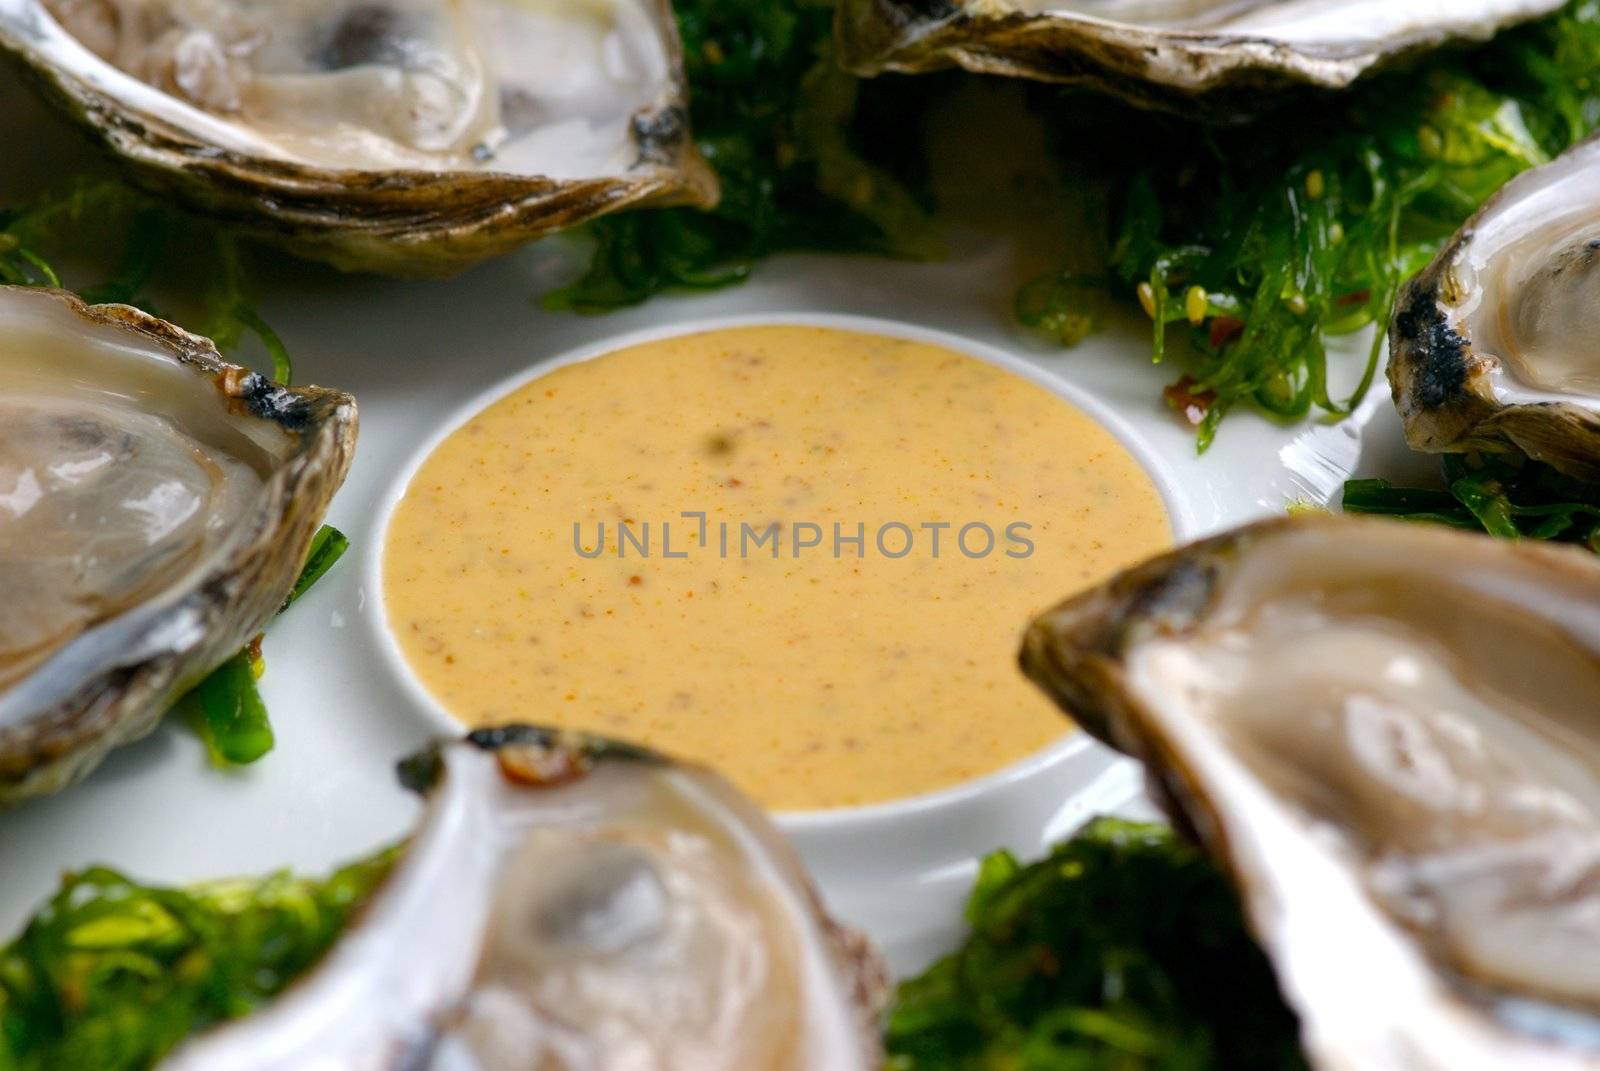 Image of oysters on garnish with sauce